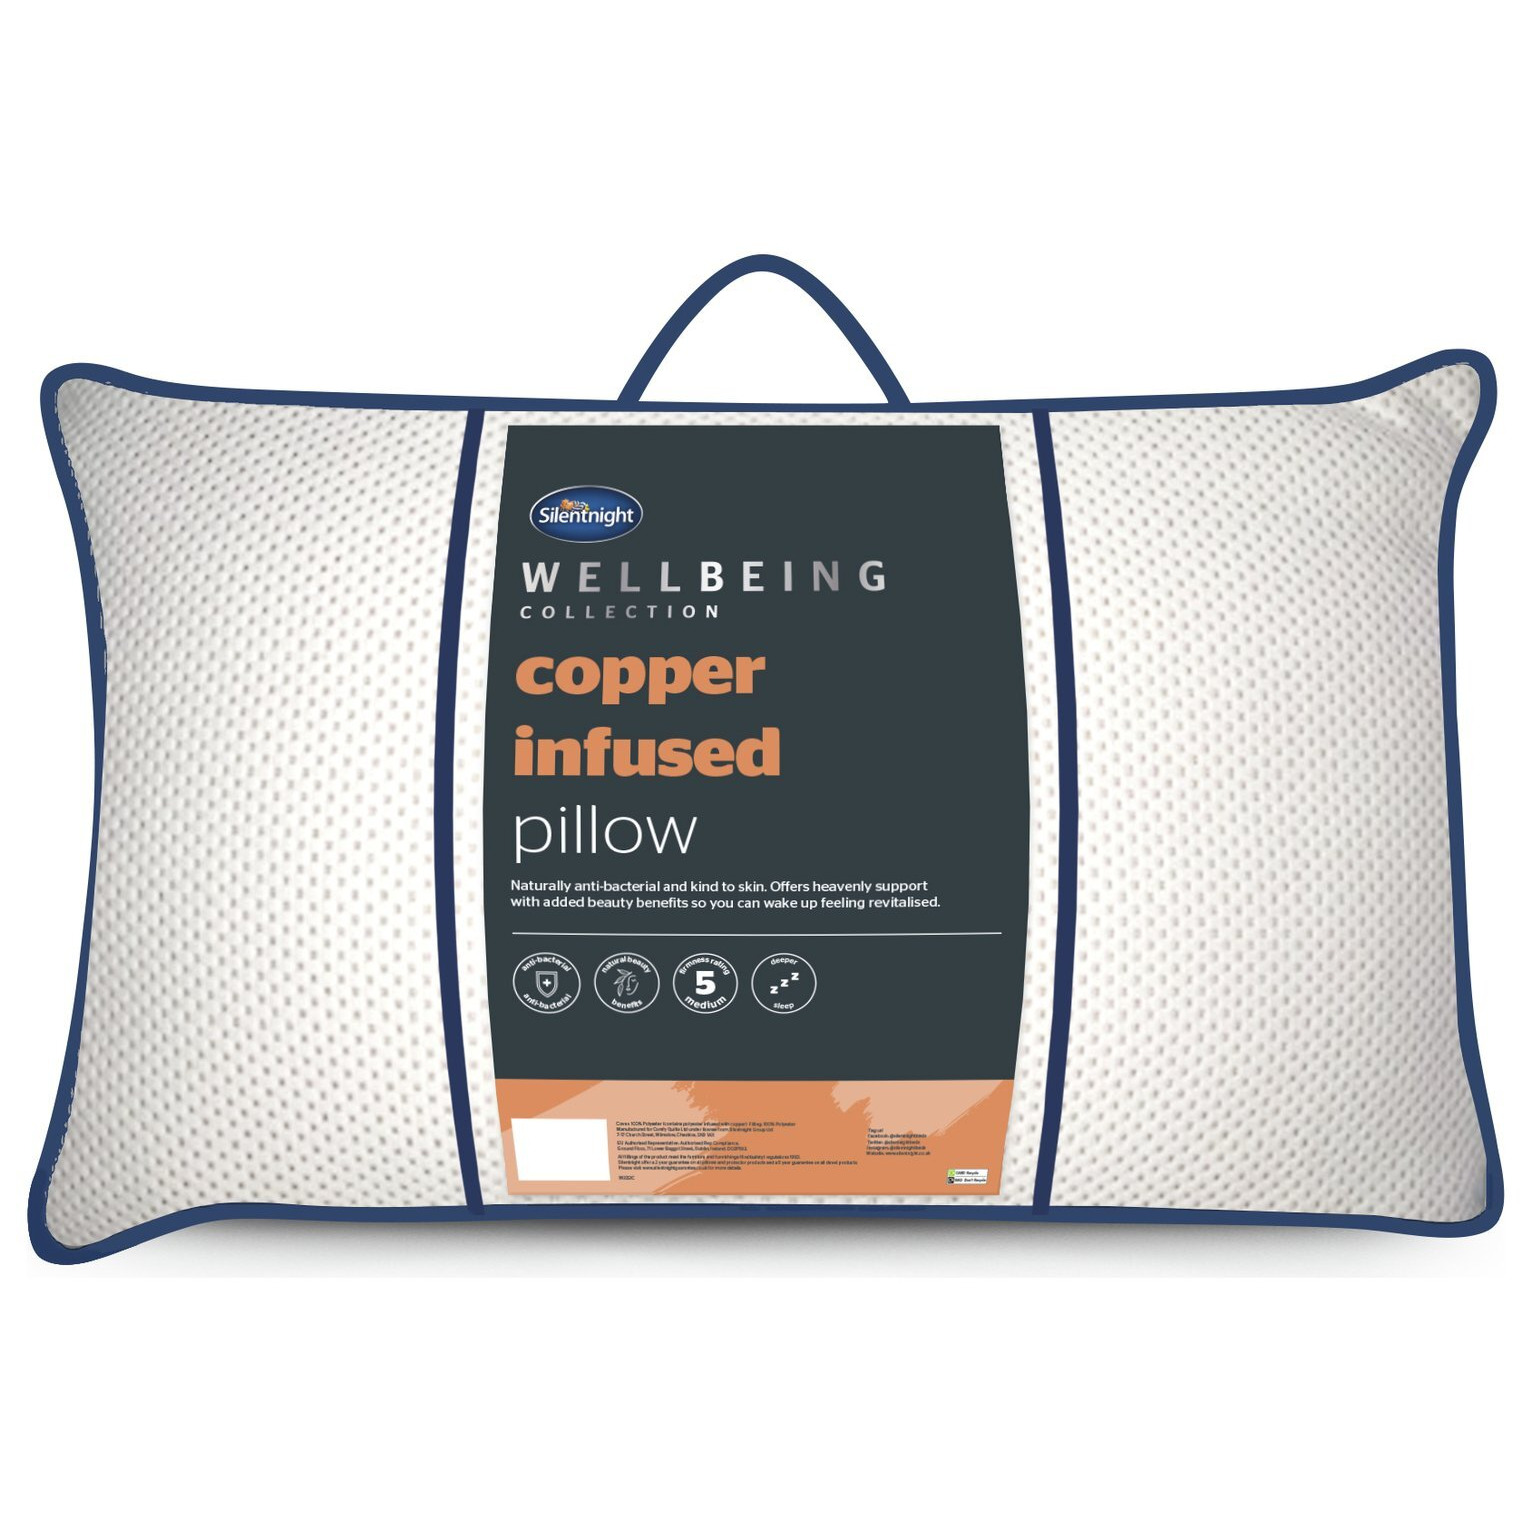 Silentnight Wellbeing Copper Infused Rejuvenating Pillow - image 1